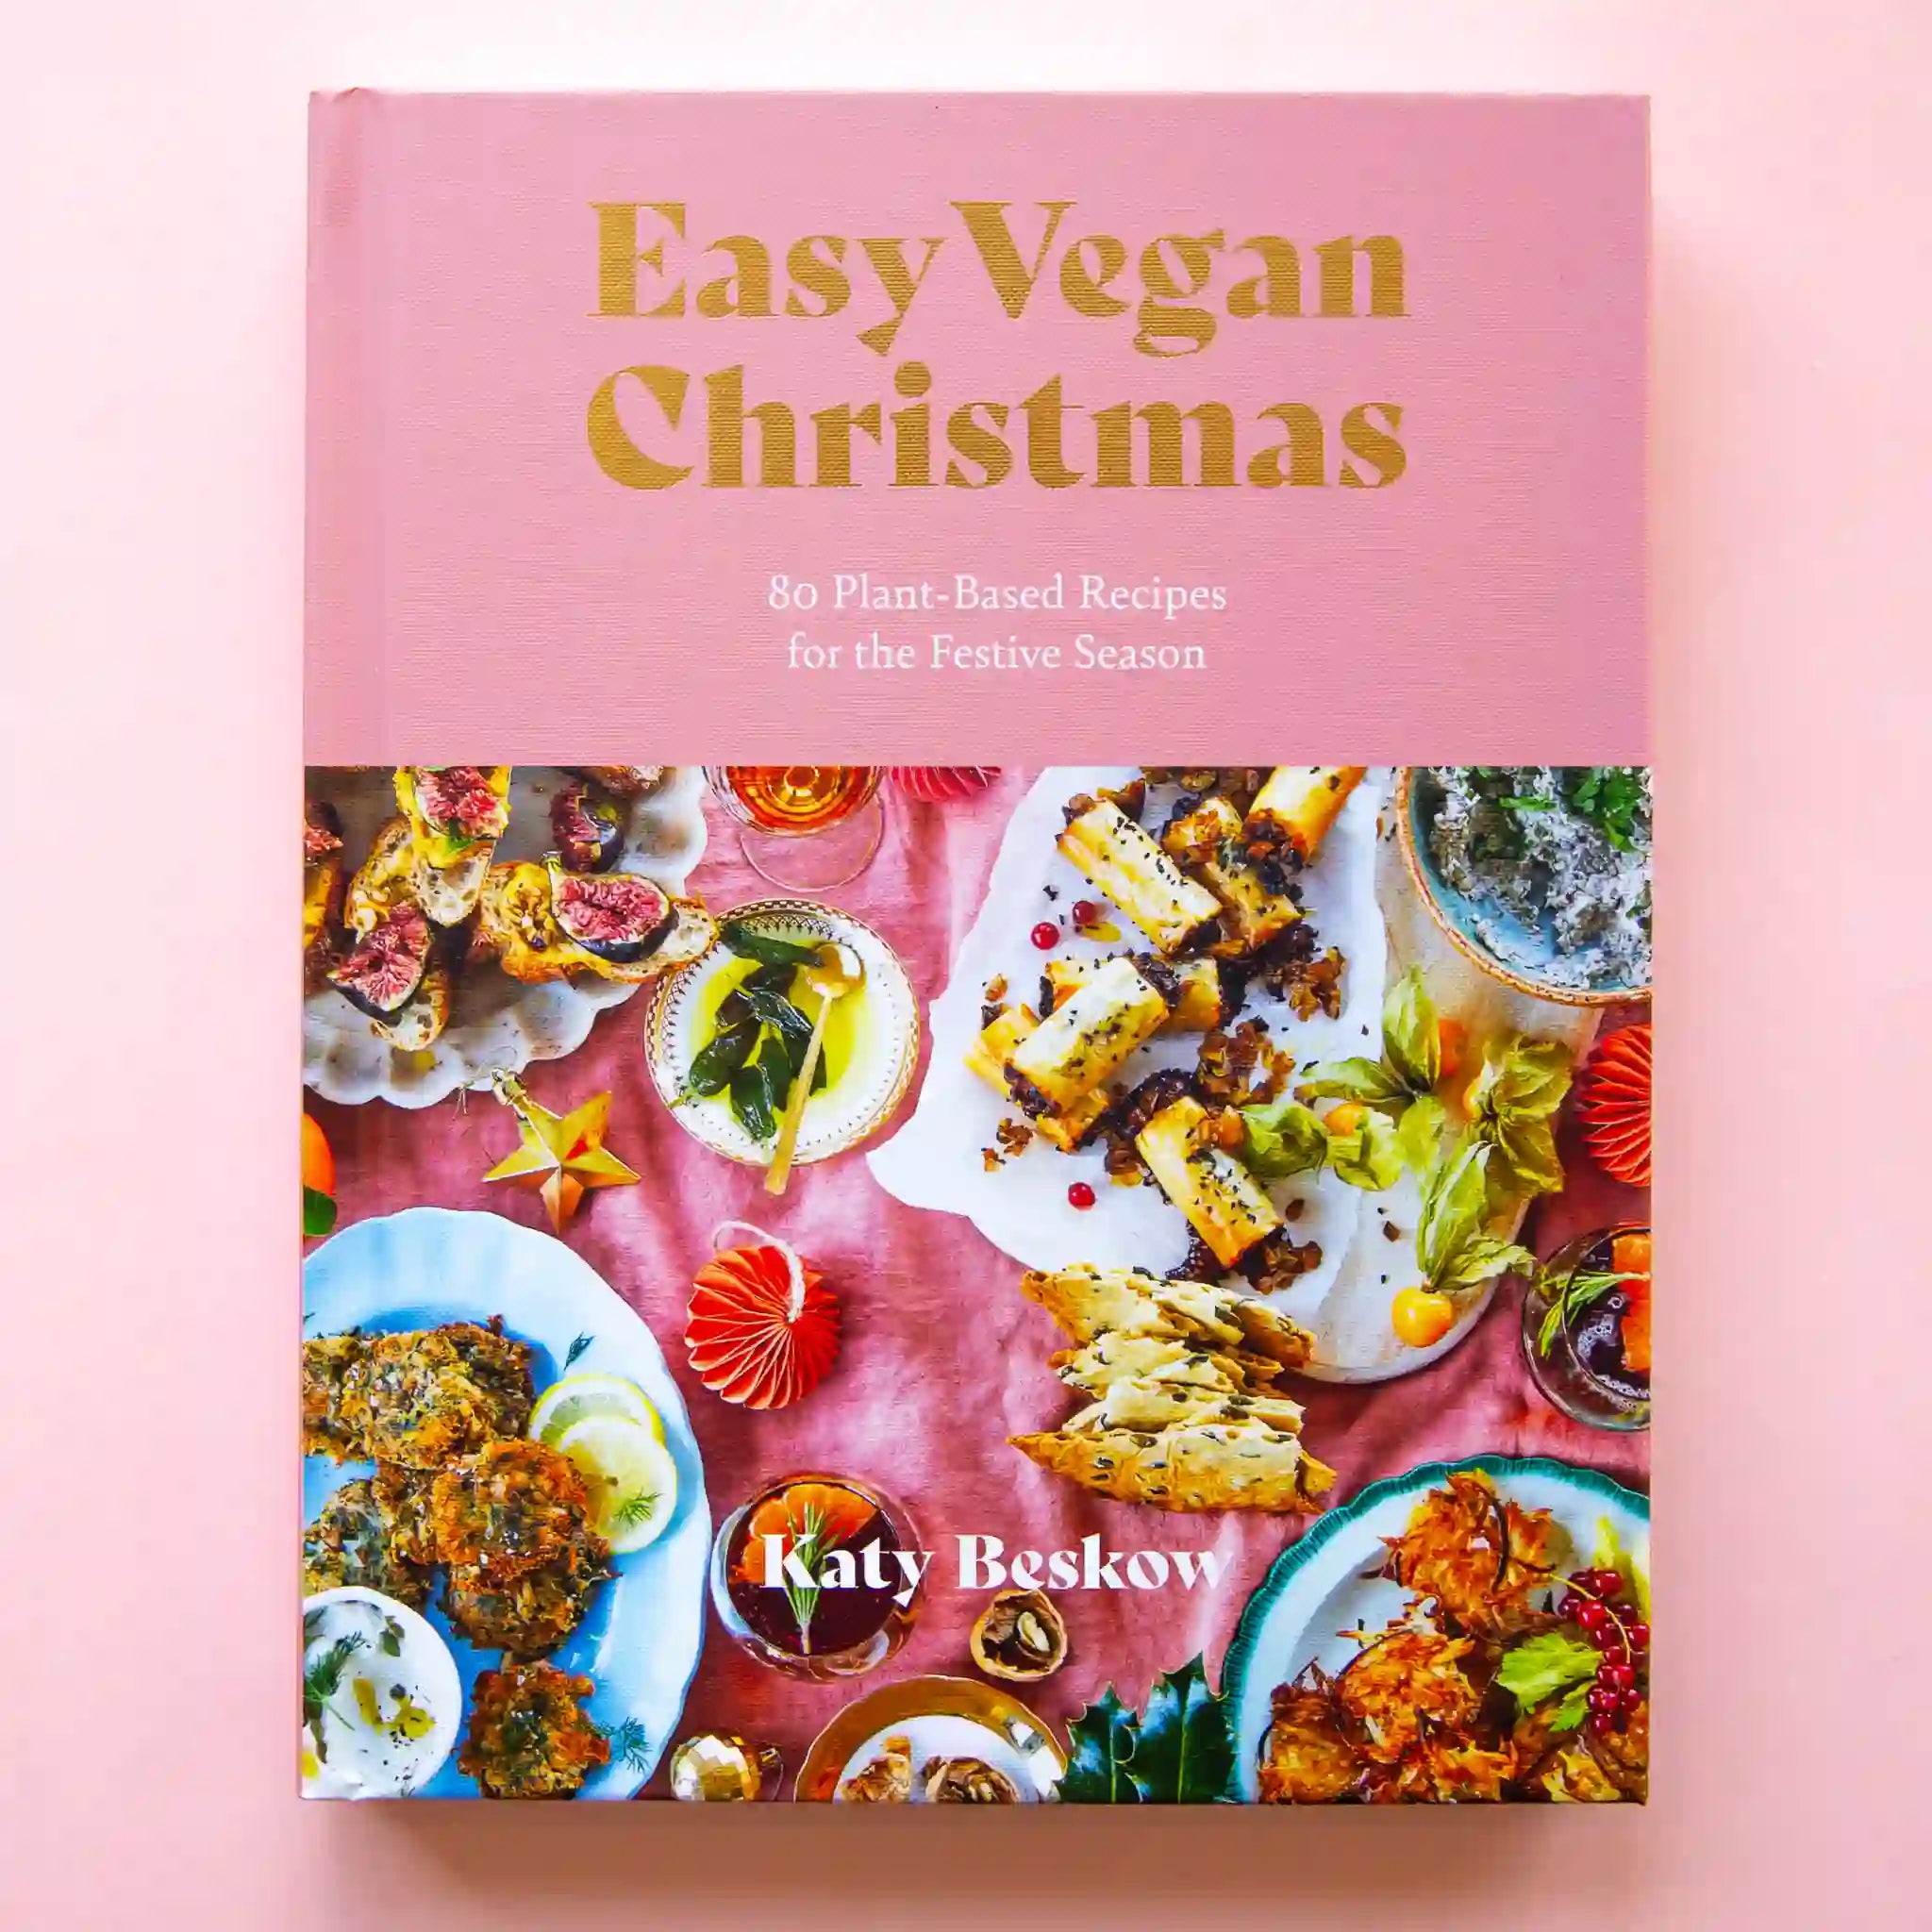 On a pink background is a pink and colorful book cover with gold text on the top that reads, "Easy Vegan Christmas", "80 Plant-Based Recipes for the Festive Season" along with a photo of colorful food laid out on a table scape. 